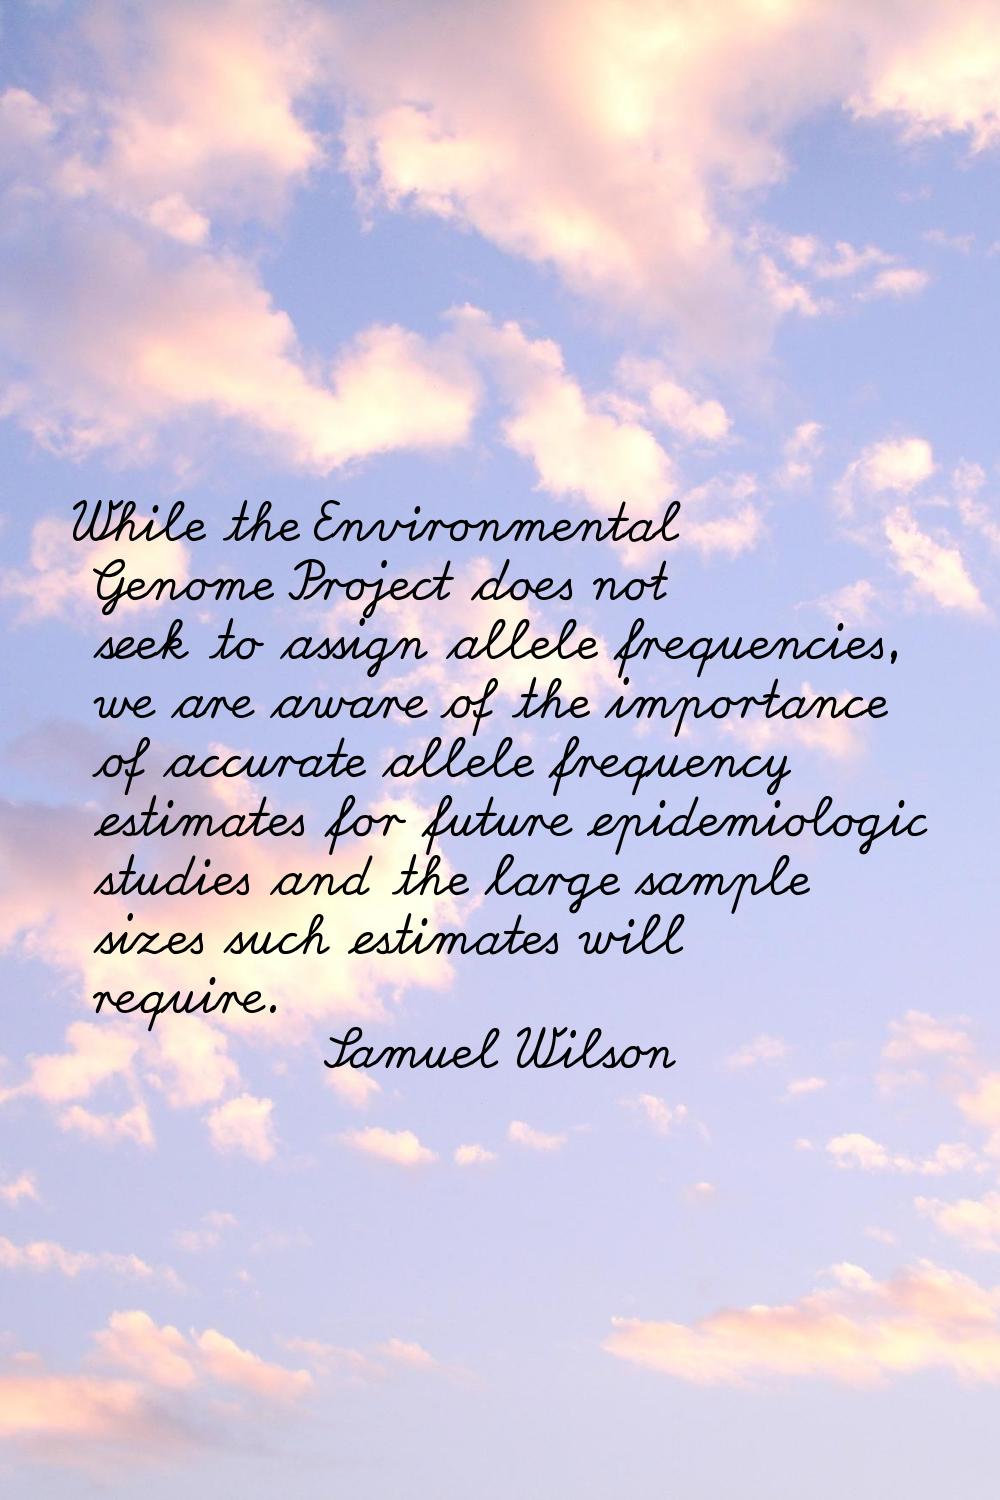 While the Environmental Genome Project does not seek to assign allele frequencies, we are aware of 